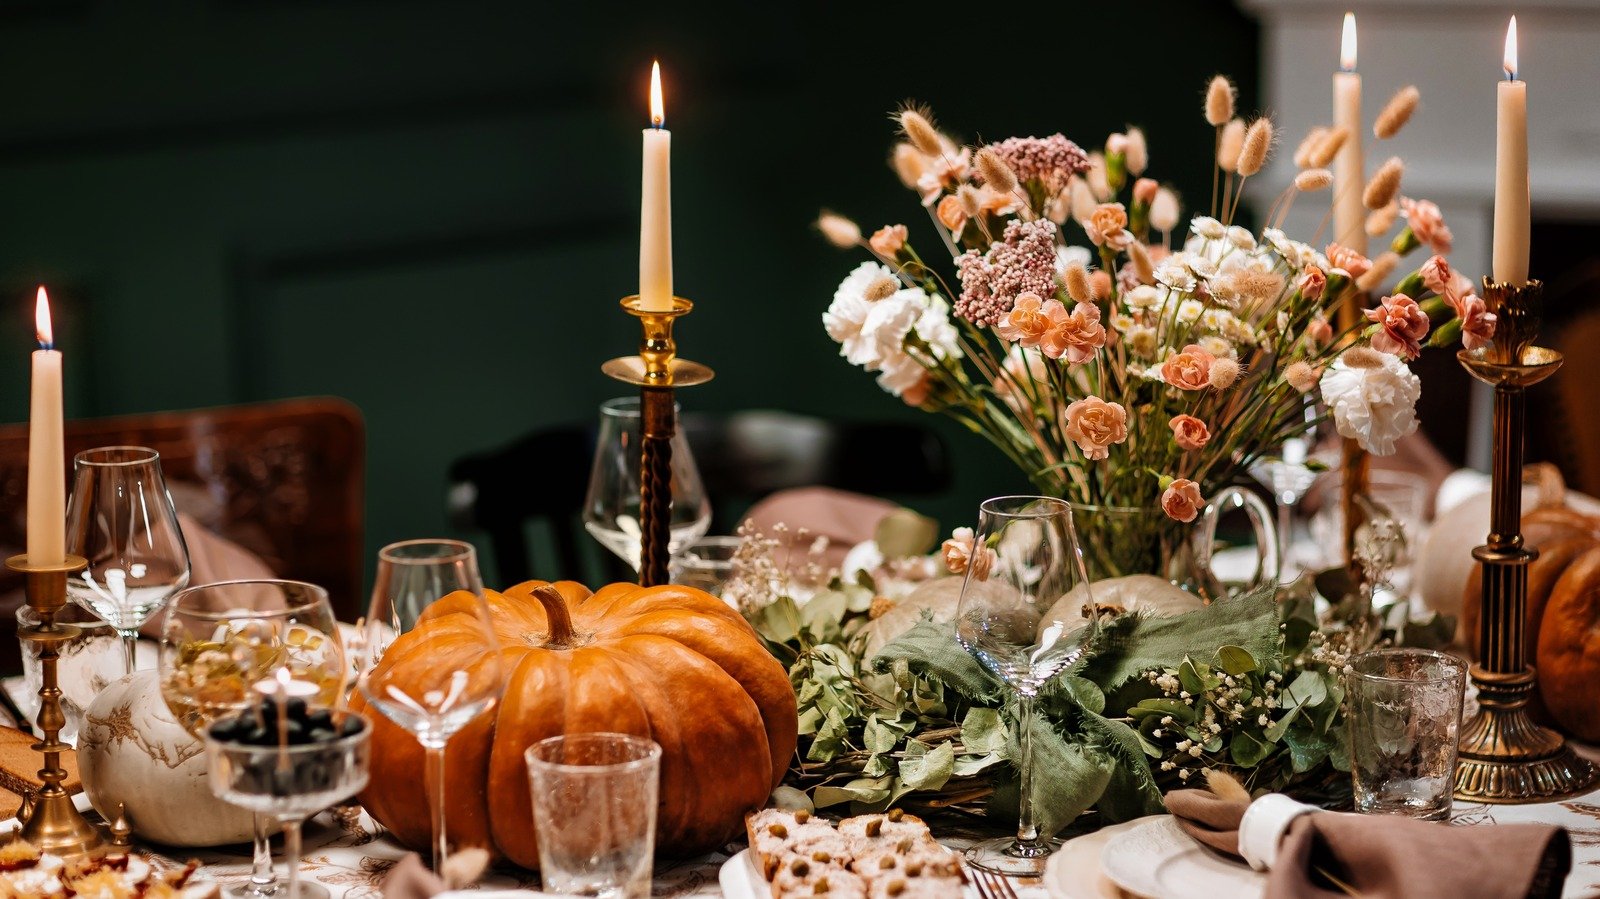 5 Décor Items You Can Get At The Thrift Store To Elevate Your Thanksgiving Table